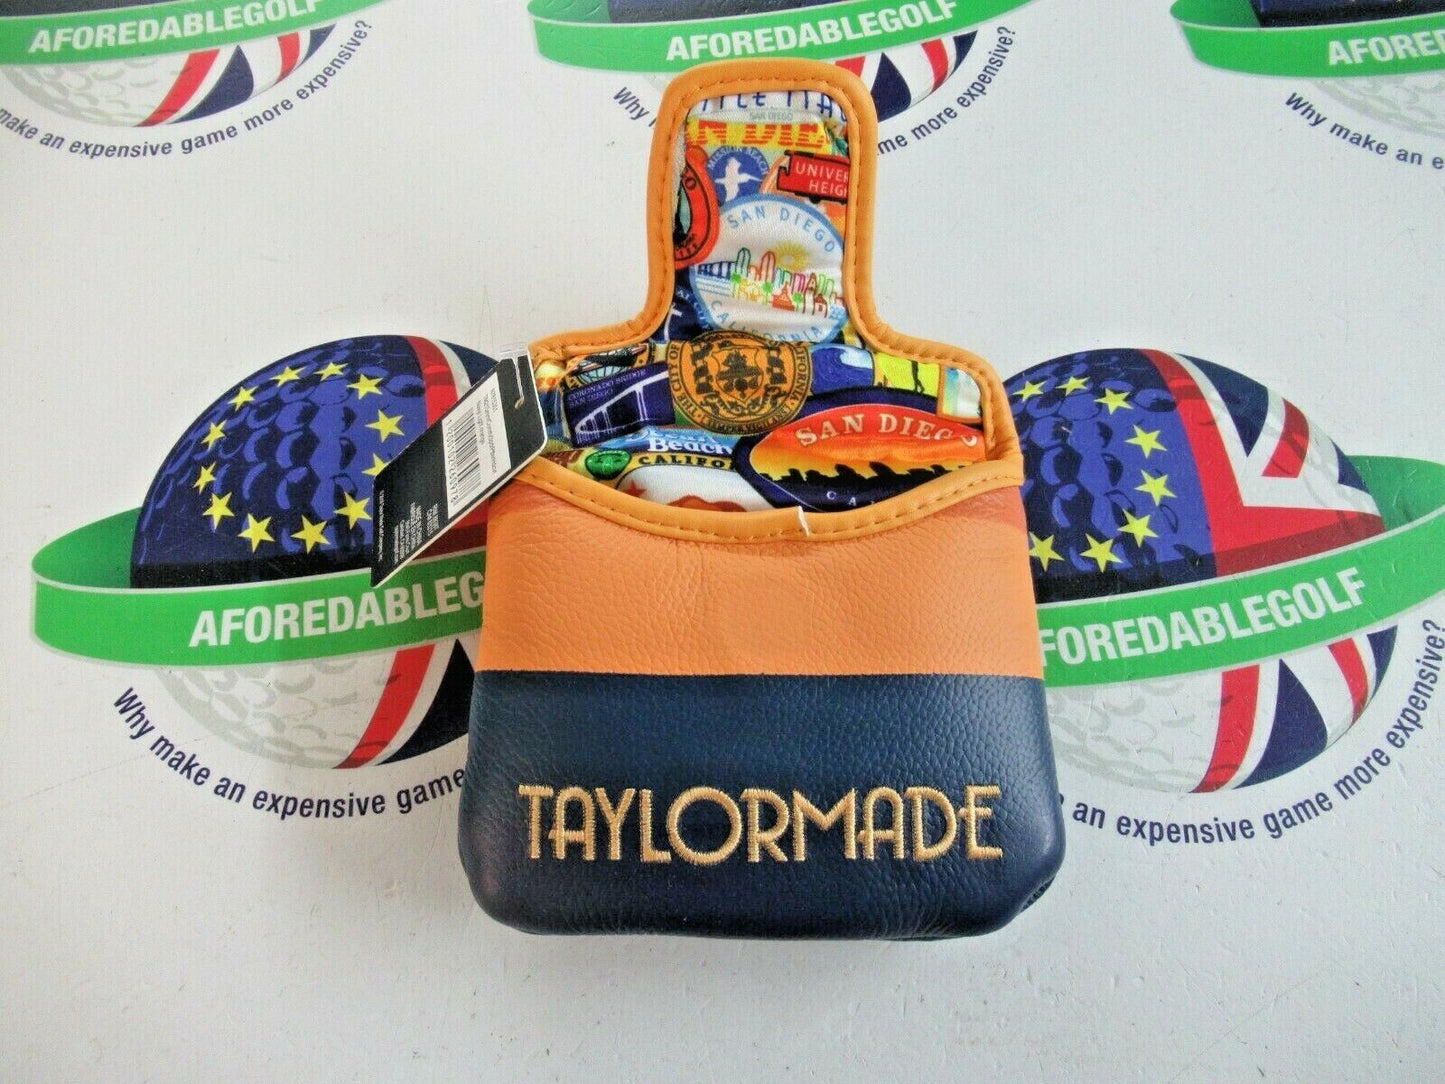 new taylormade vault limited edition summer spider mallet putter head cover